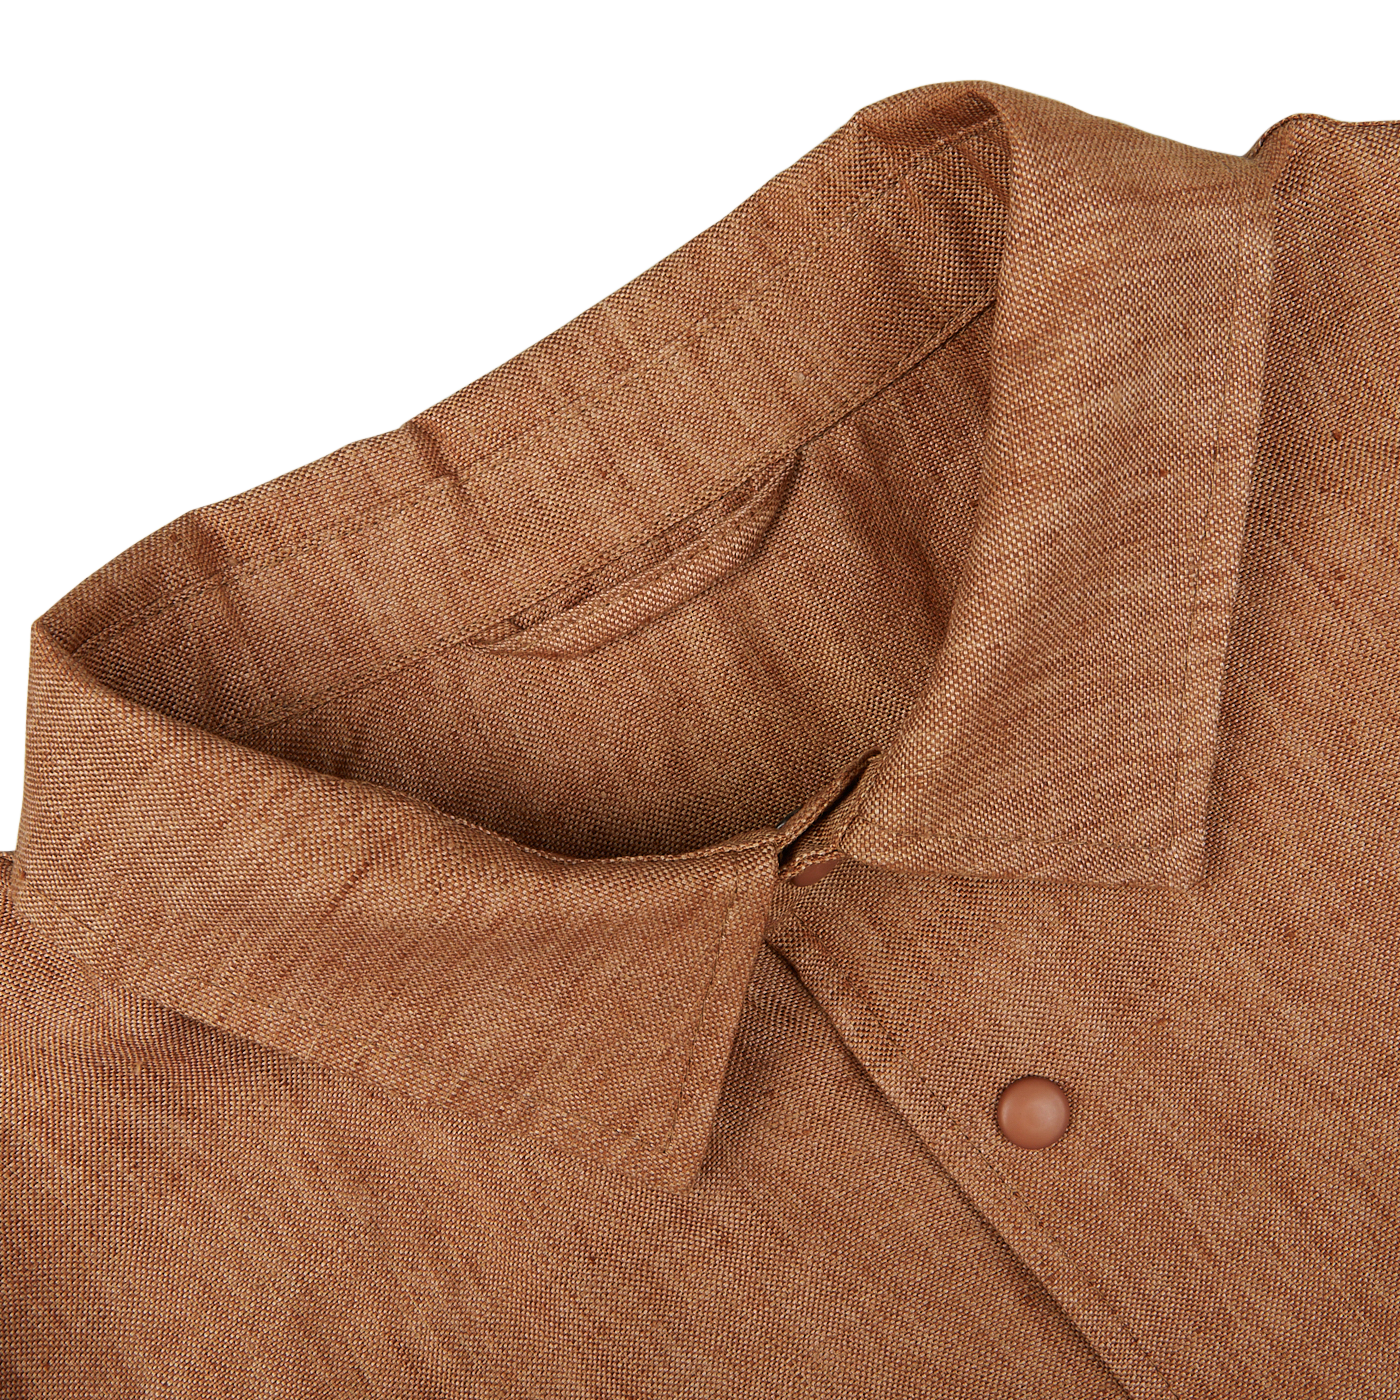 Close-up view of a Mazzarelli terracotta brown organic linen overshirt with a focus on the collar and button detail.